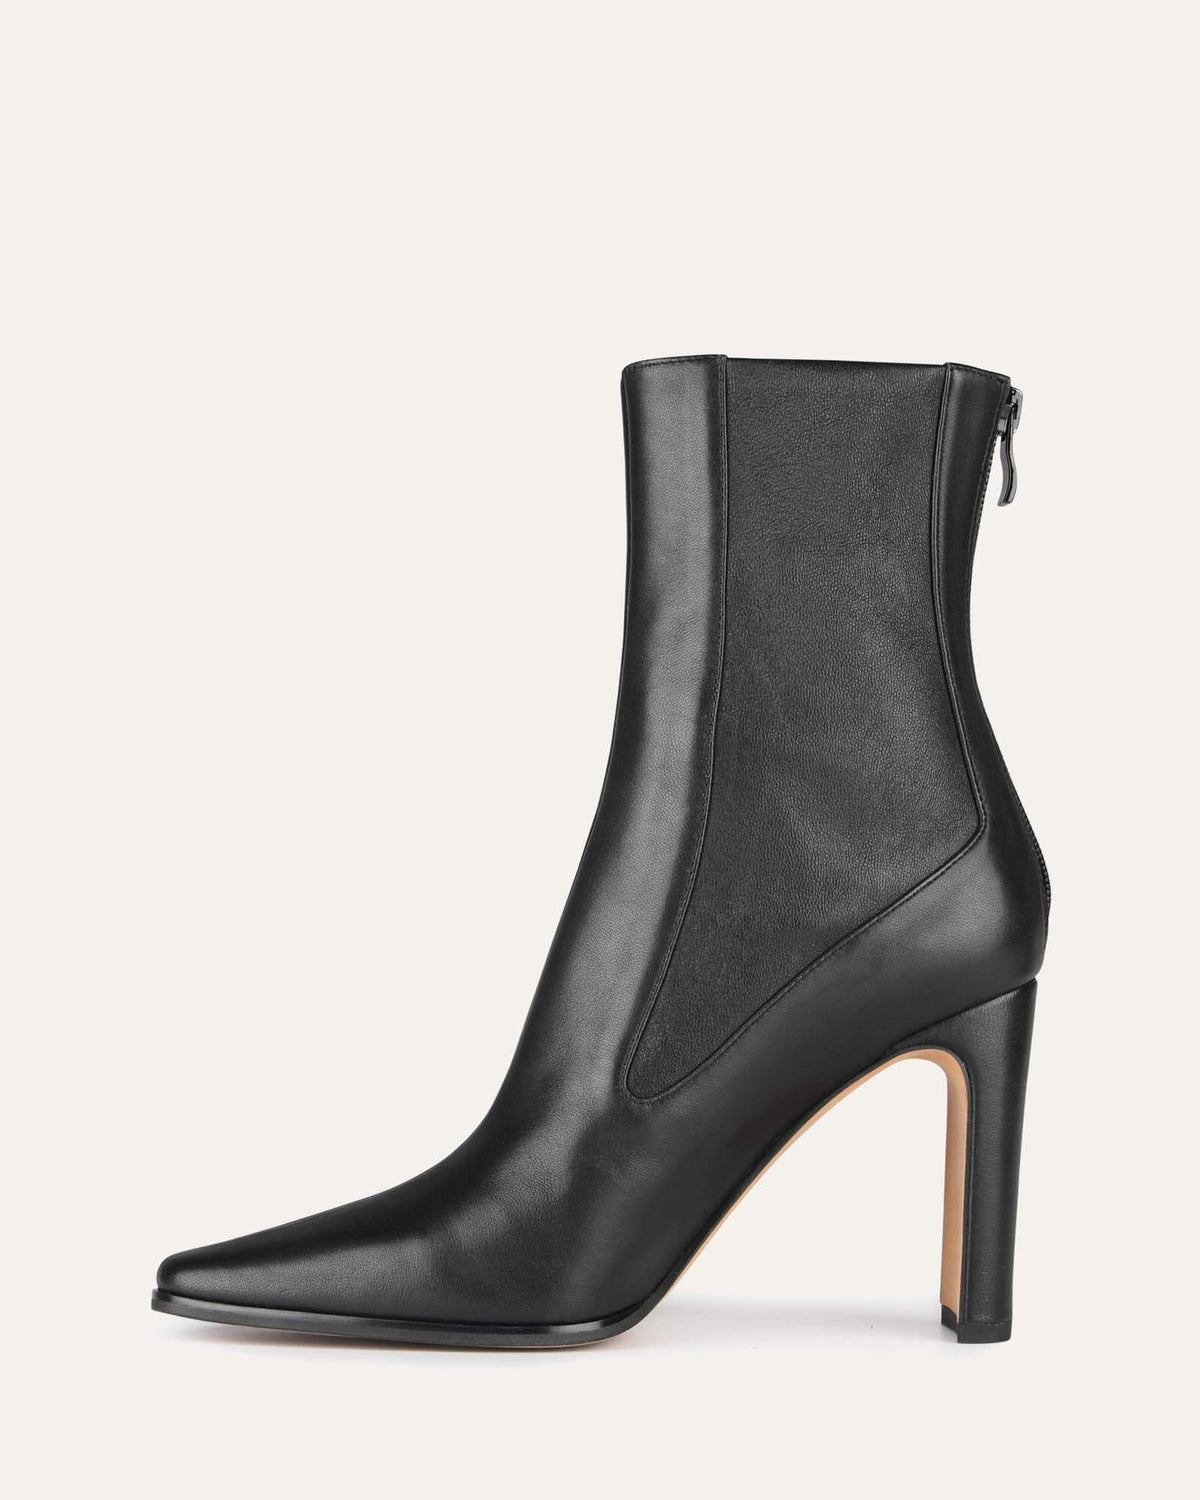 JUNE HIGH ANKLE BOOTS BLACK LEATHER